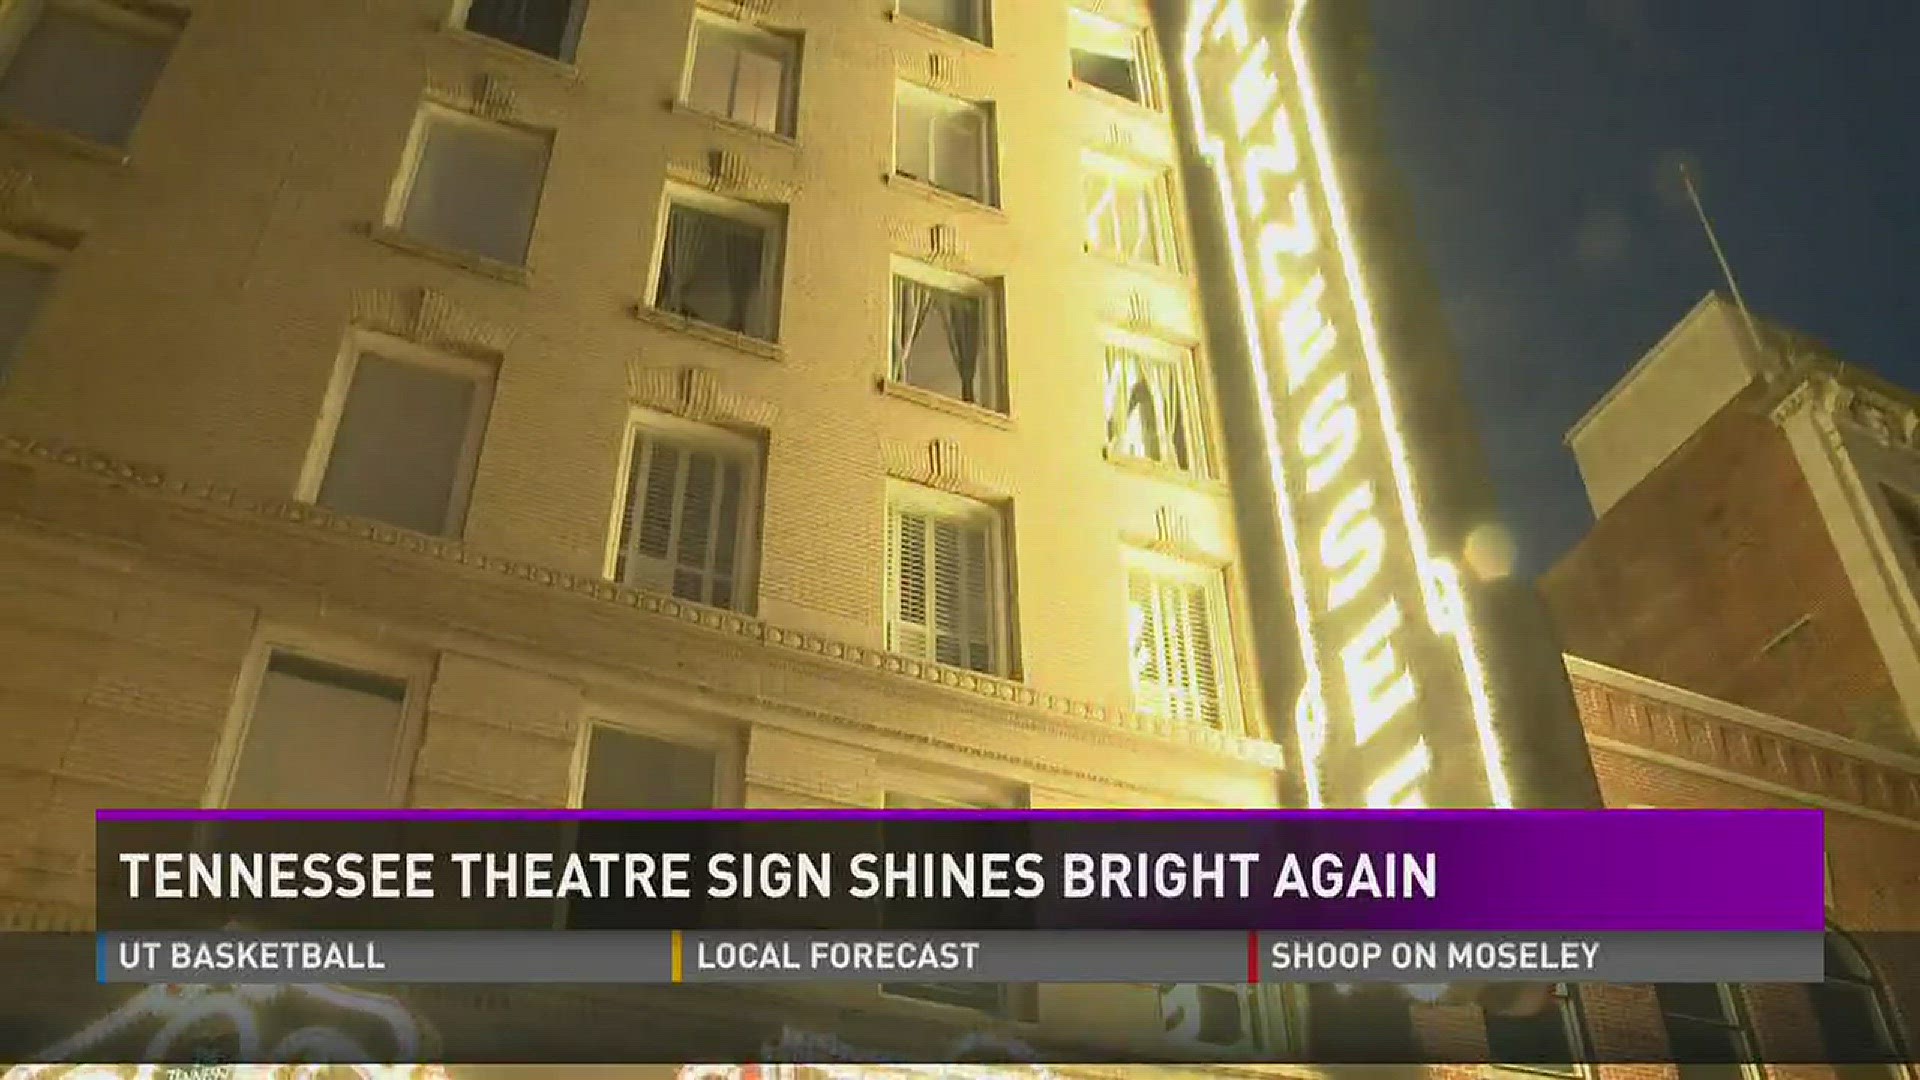 Hundreds of people gathered on Gay Street for the re-lighting of the iconic Tennessee Theatre sign.